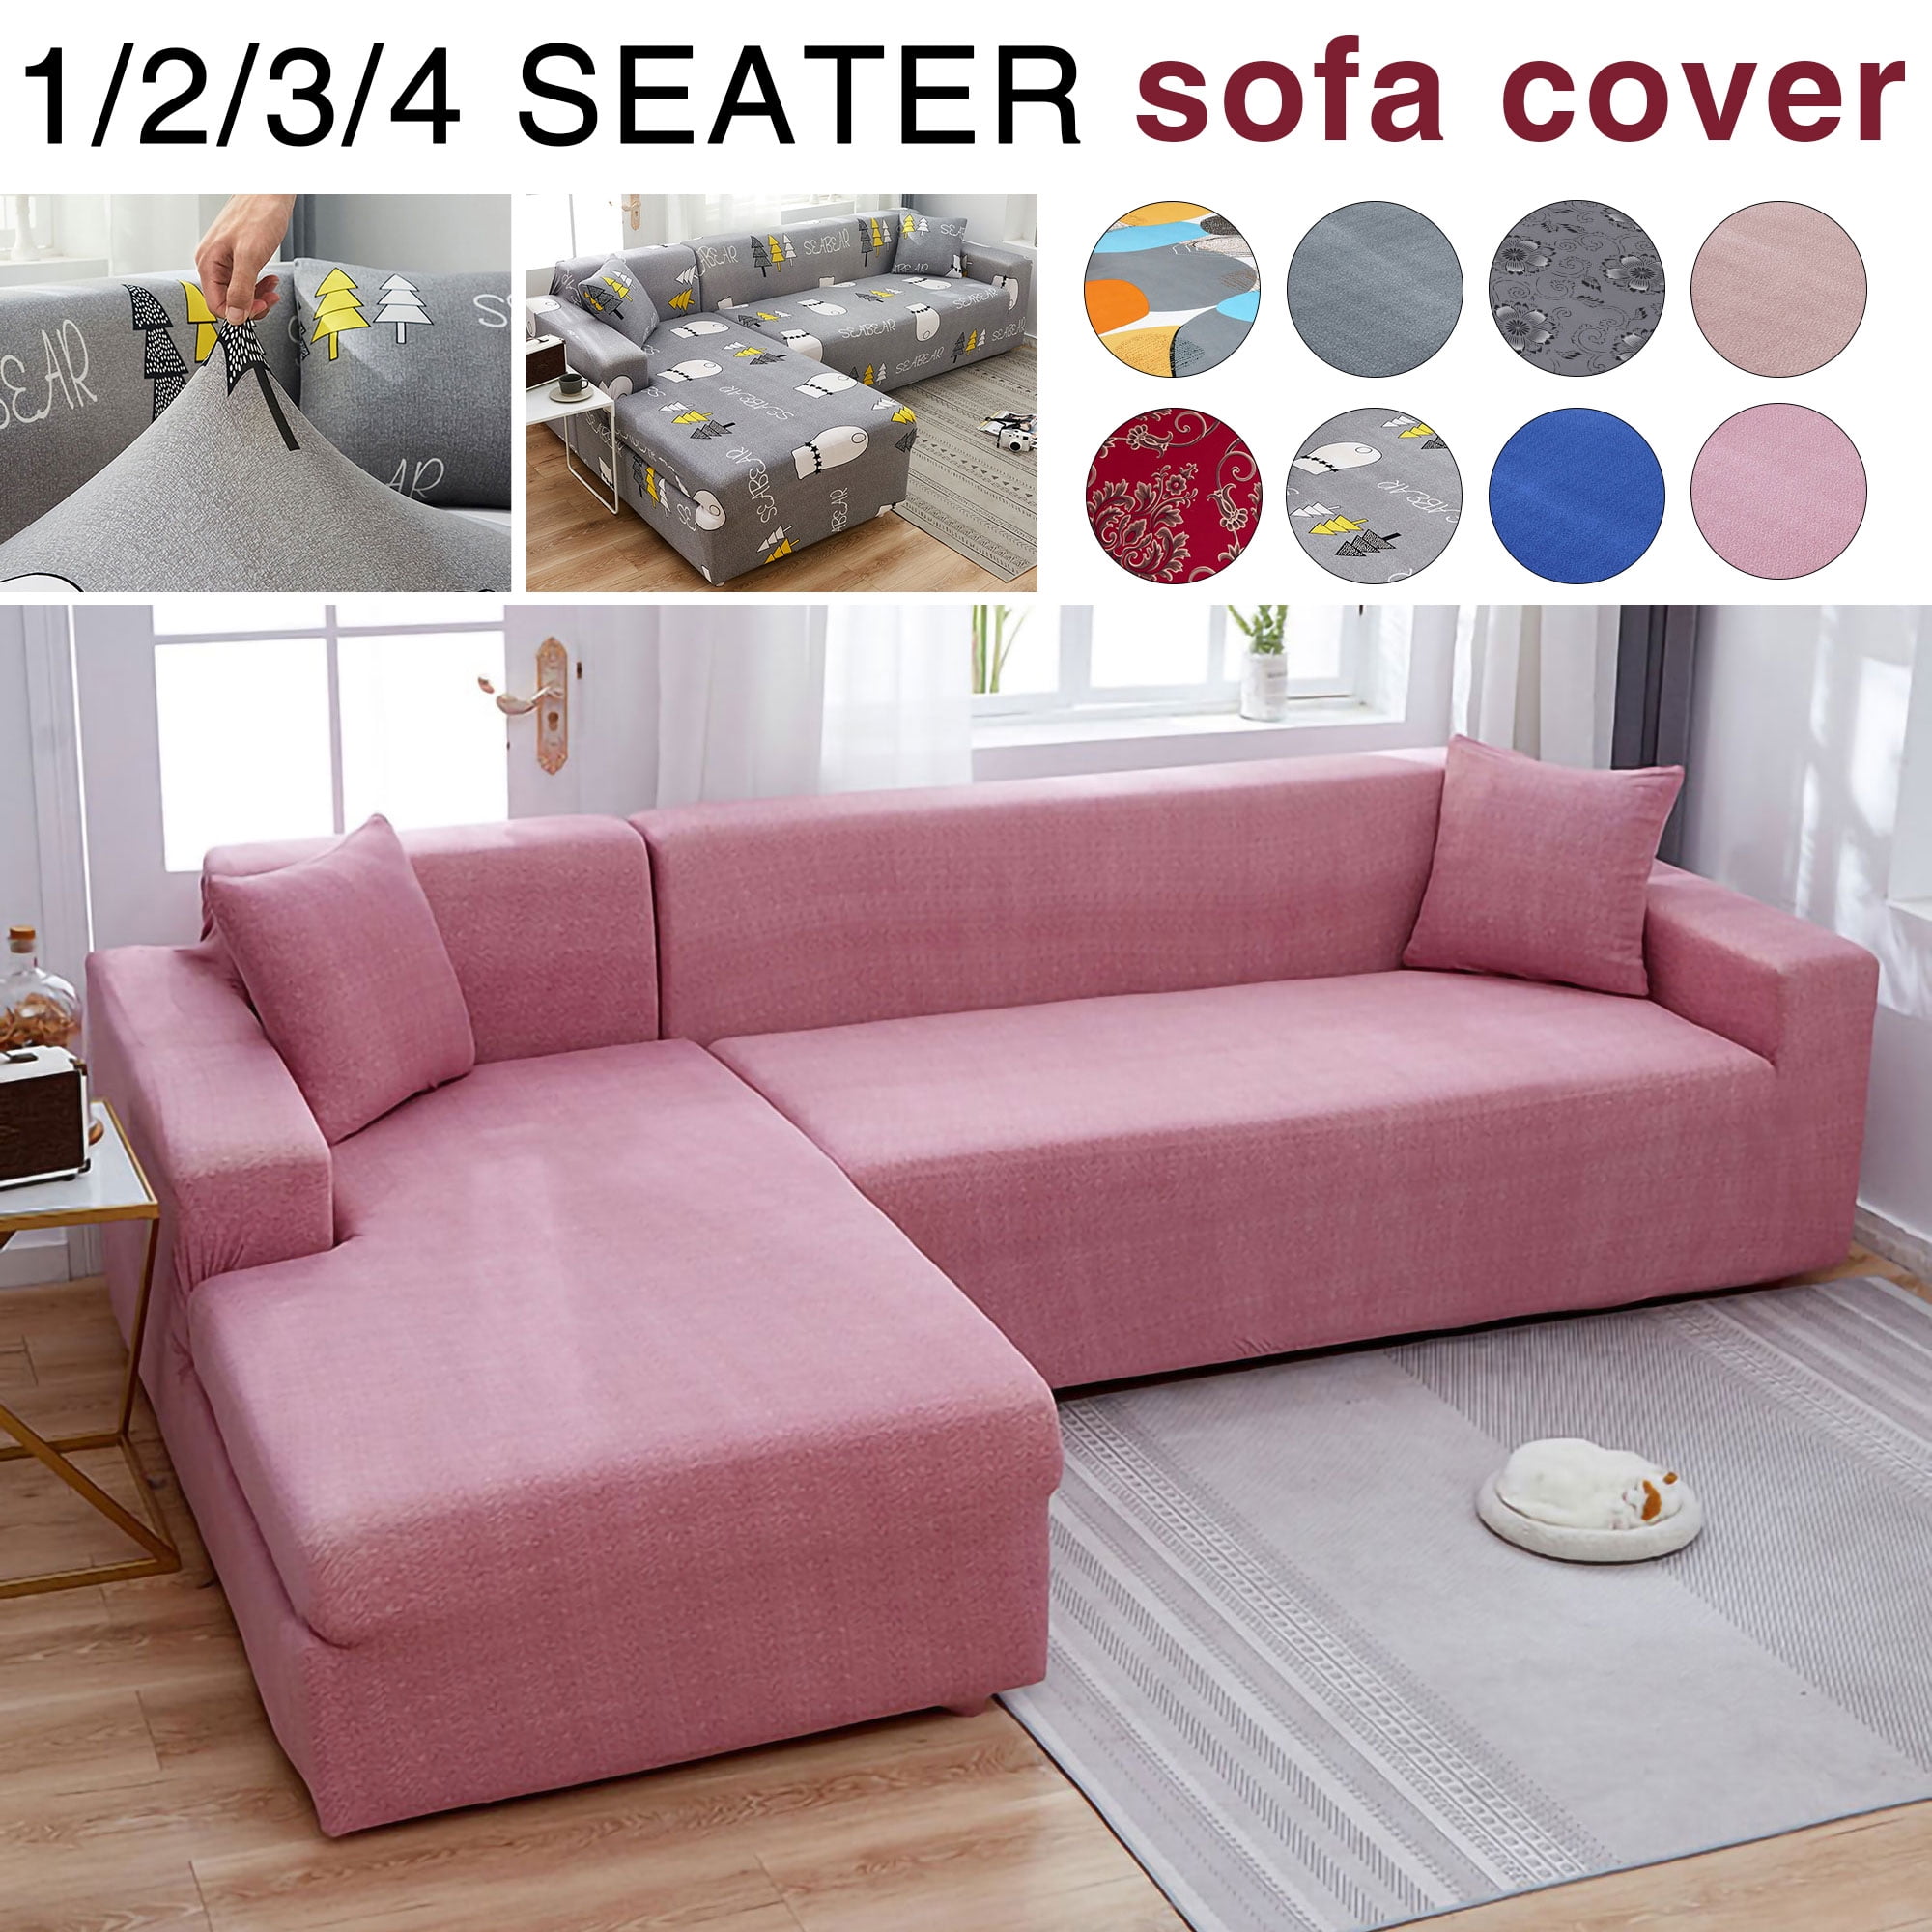 Details about   1-4Seater Soild Color Soft Elastic Stretch Slipcover Protector Sofa Couch Covers 